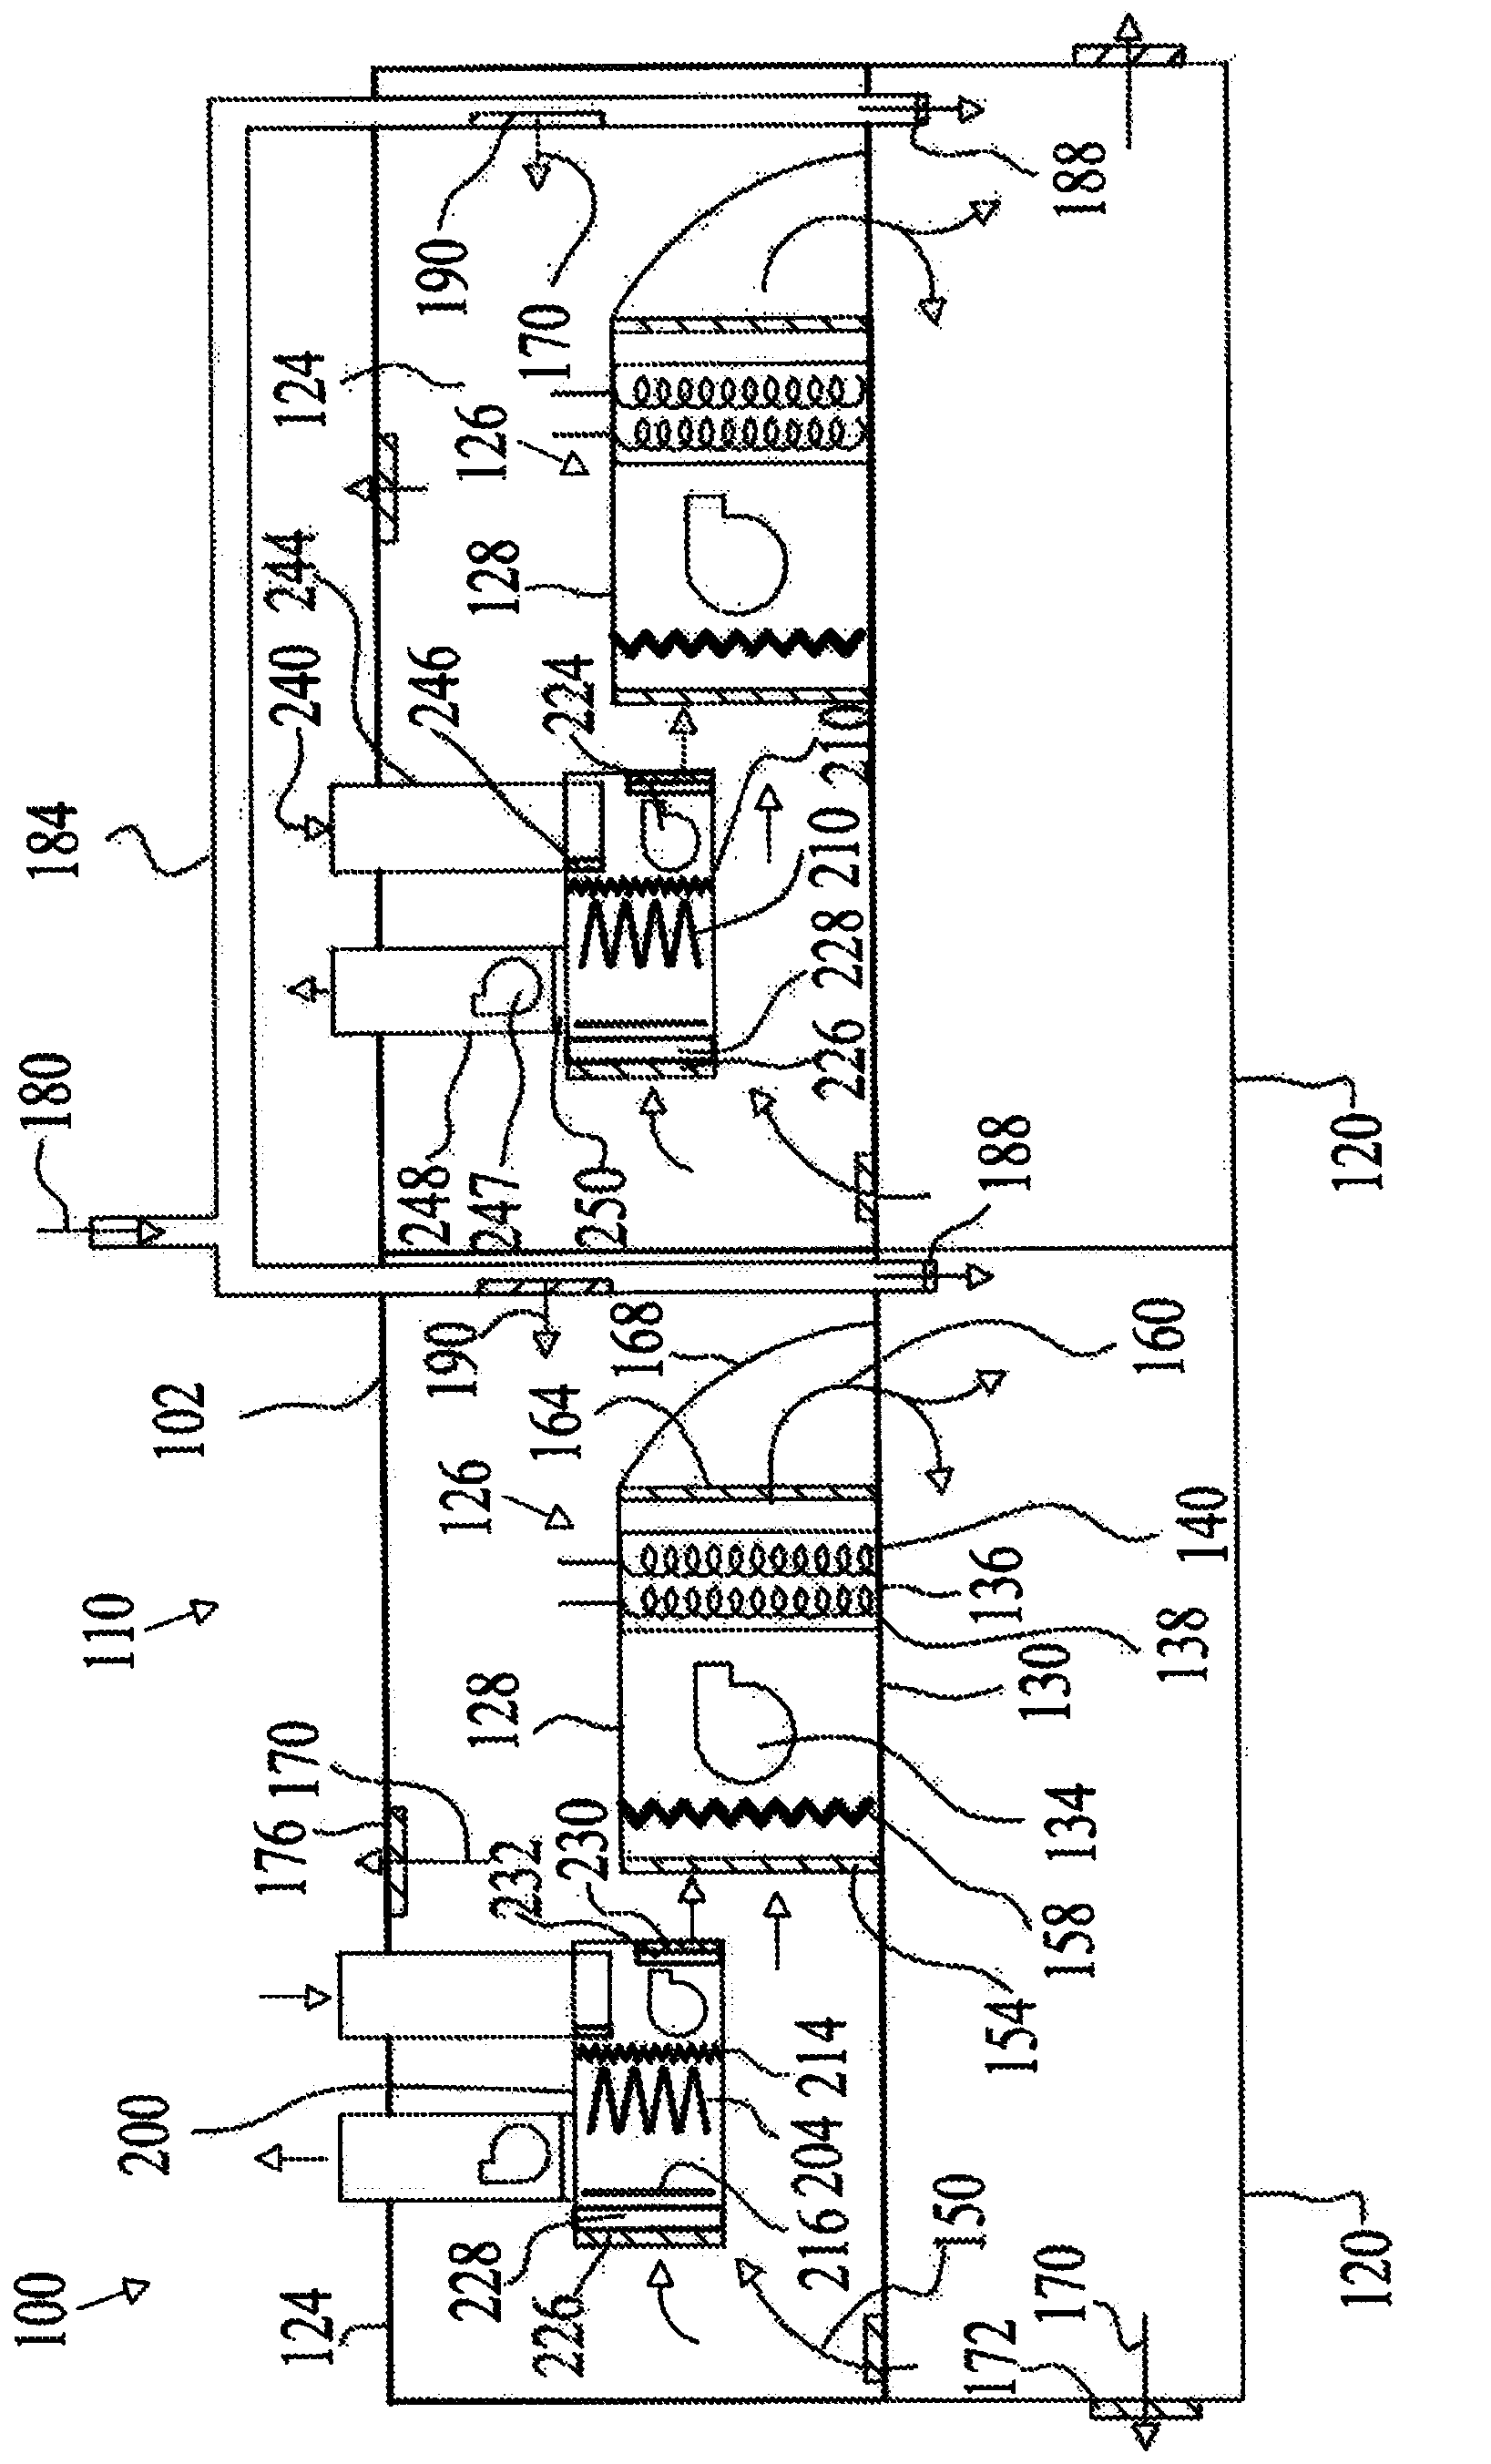 Method and system for conditioning air in an enclosed environment with distributed air circulation systems